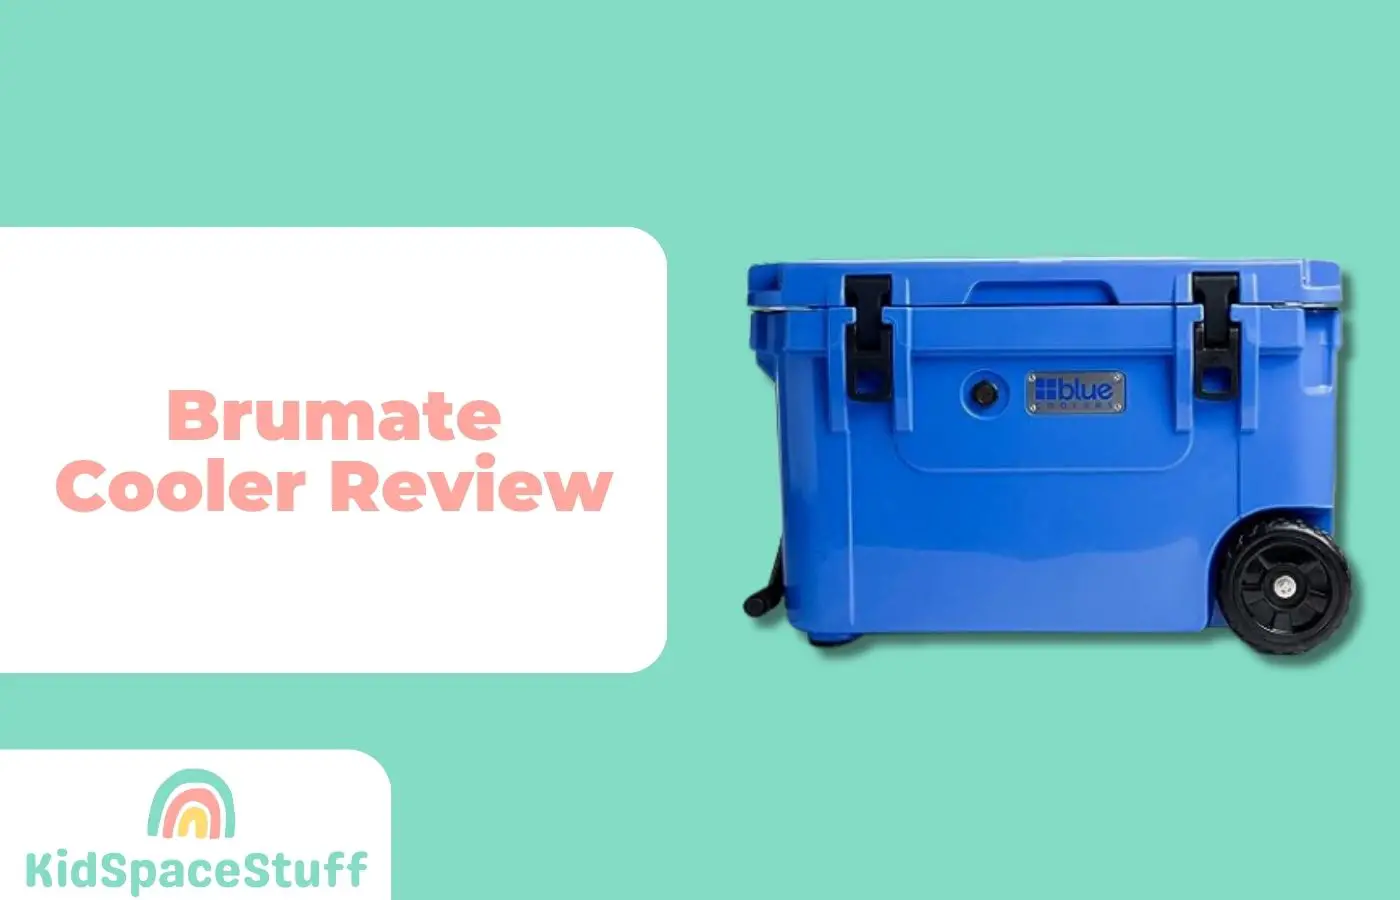 Brumate Cooler Review: Is It Worth The Money? (2023 Review)